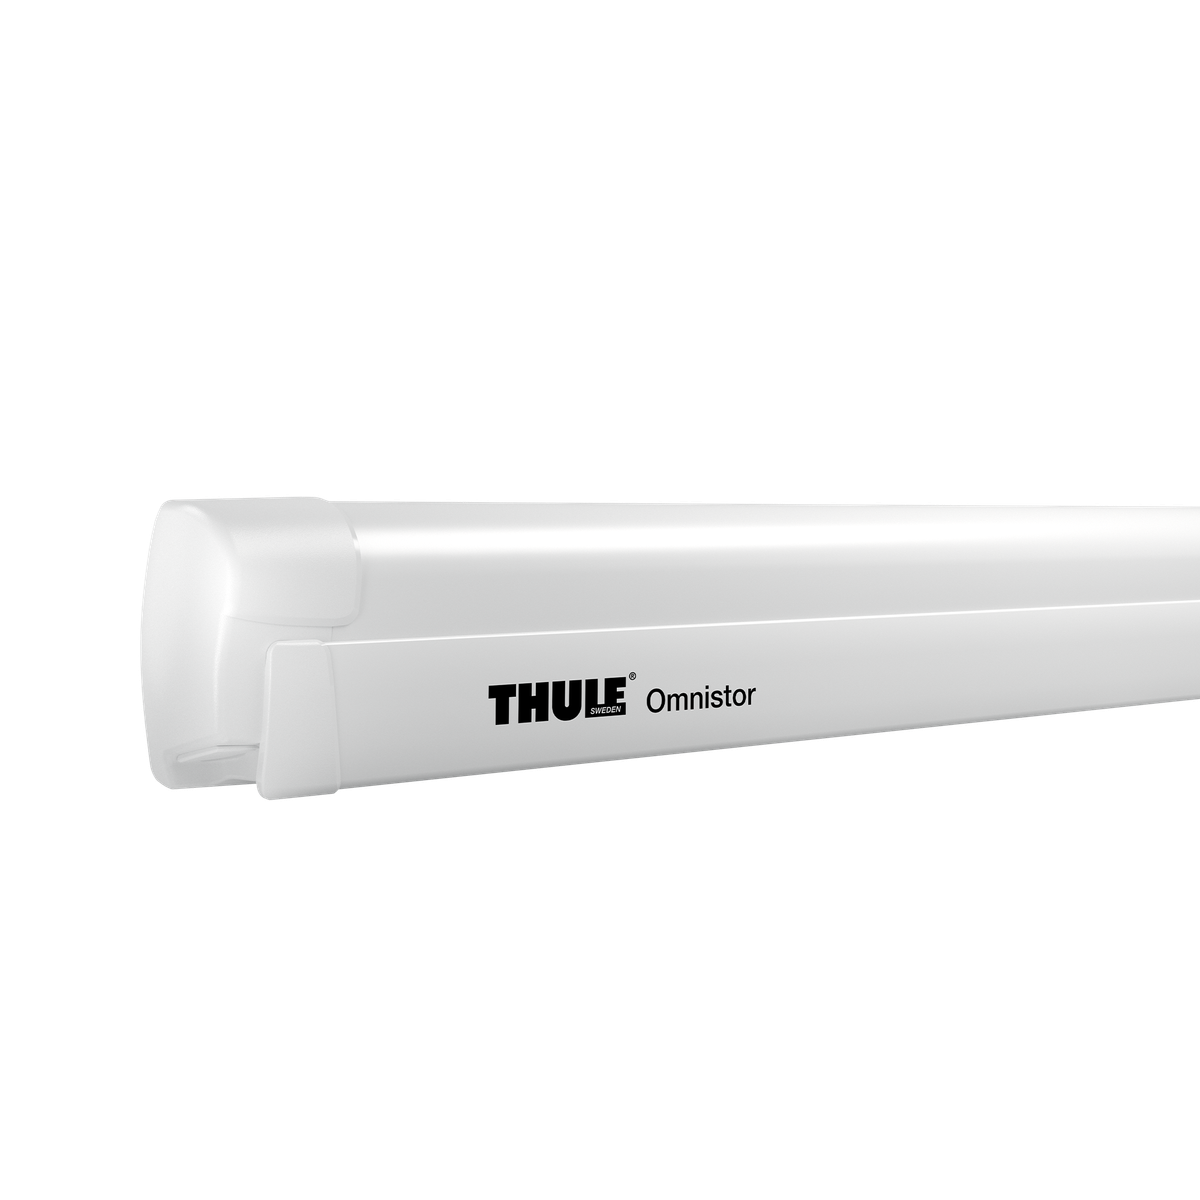 Thule Omnistor 8000 motorized wall awning 6.00x2.75m white